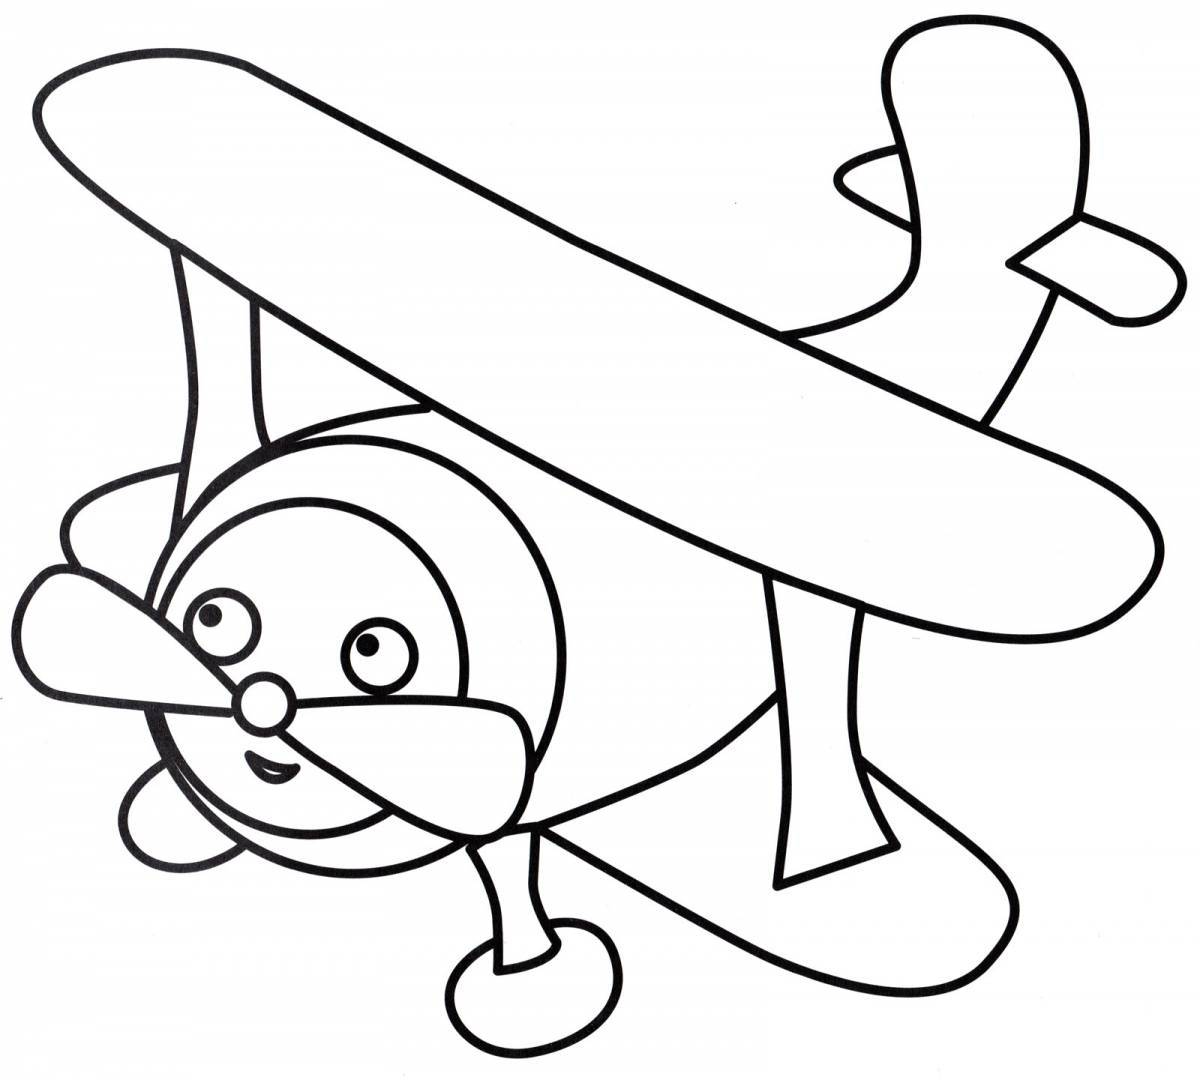 Cute plane coloring book for 3-4 year olds